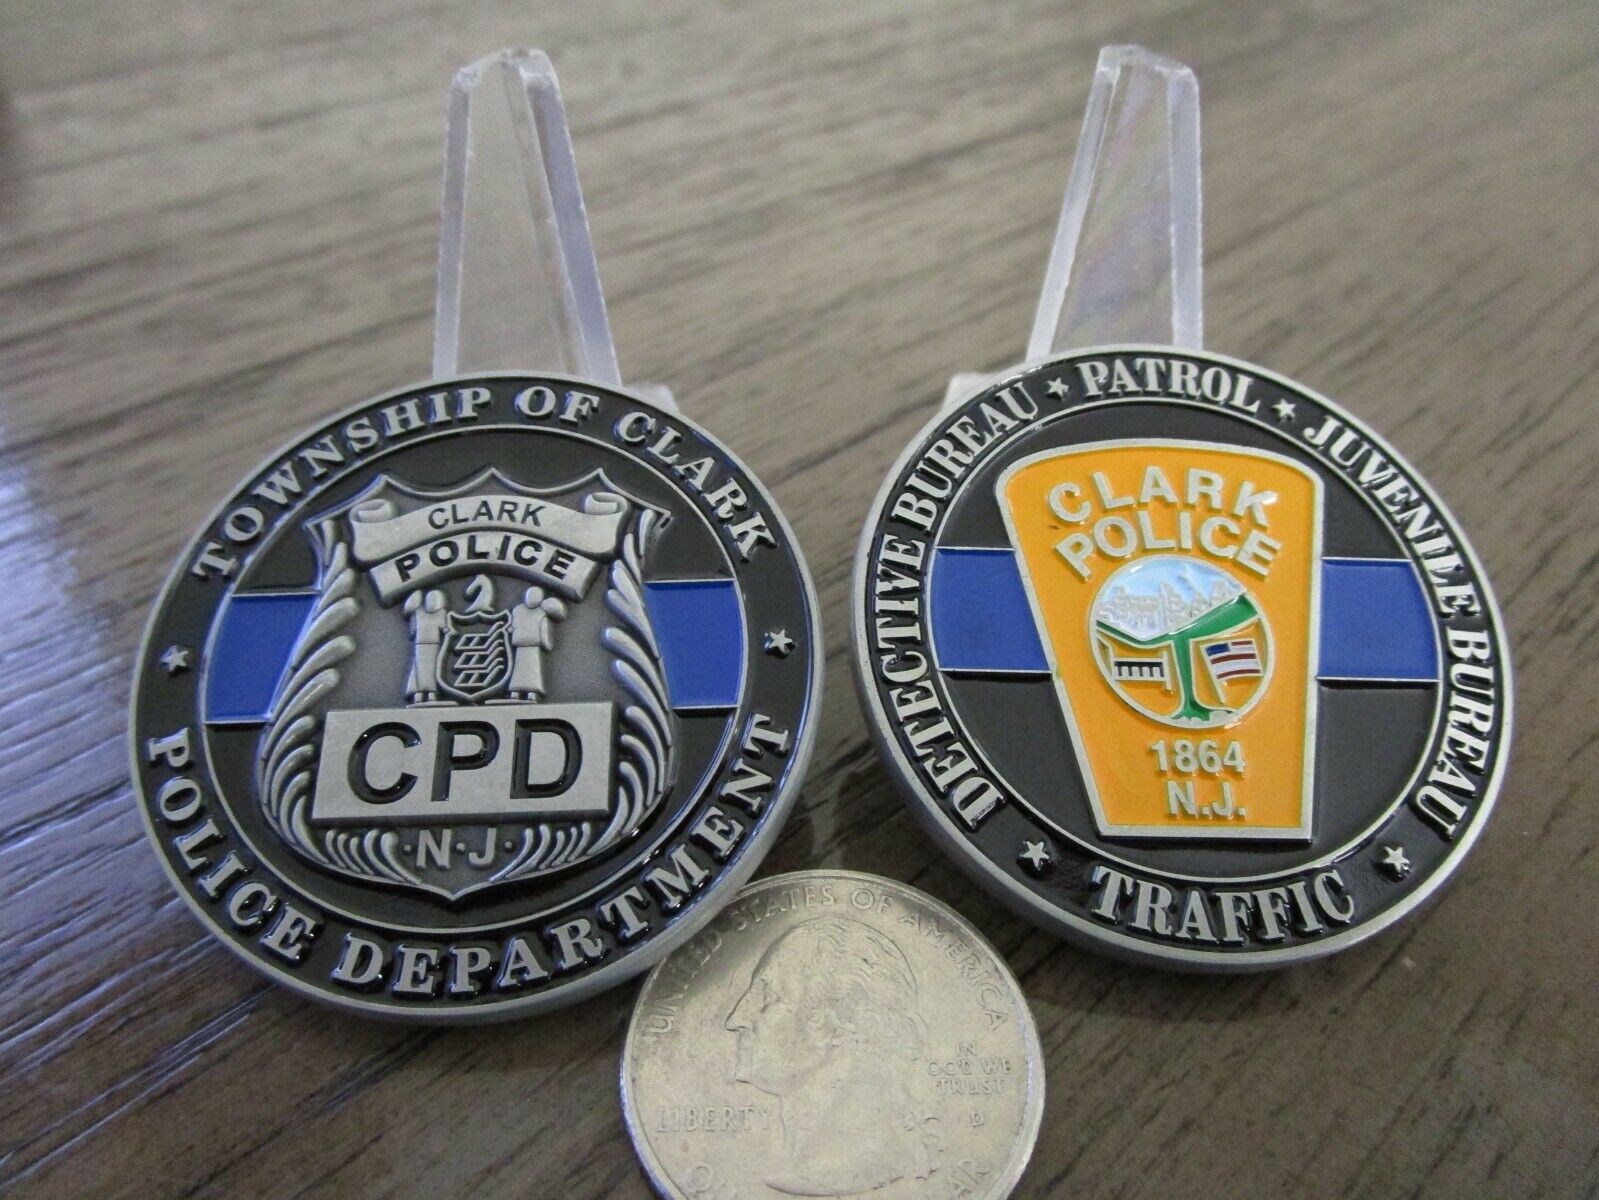 Township of Clark Police Department New Jersey CPD Challenge Coin.